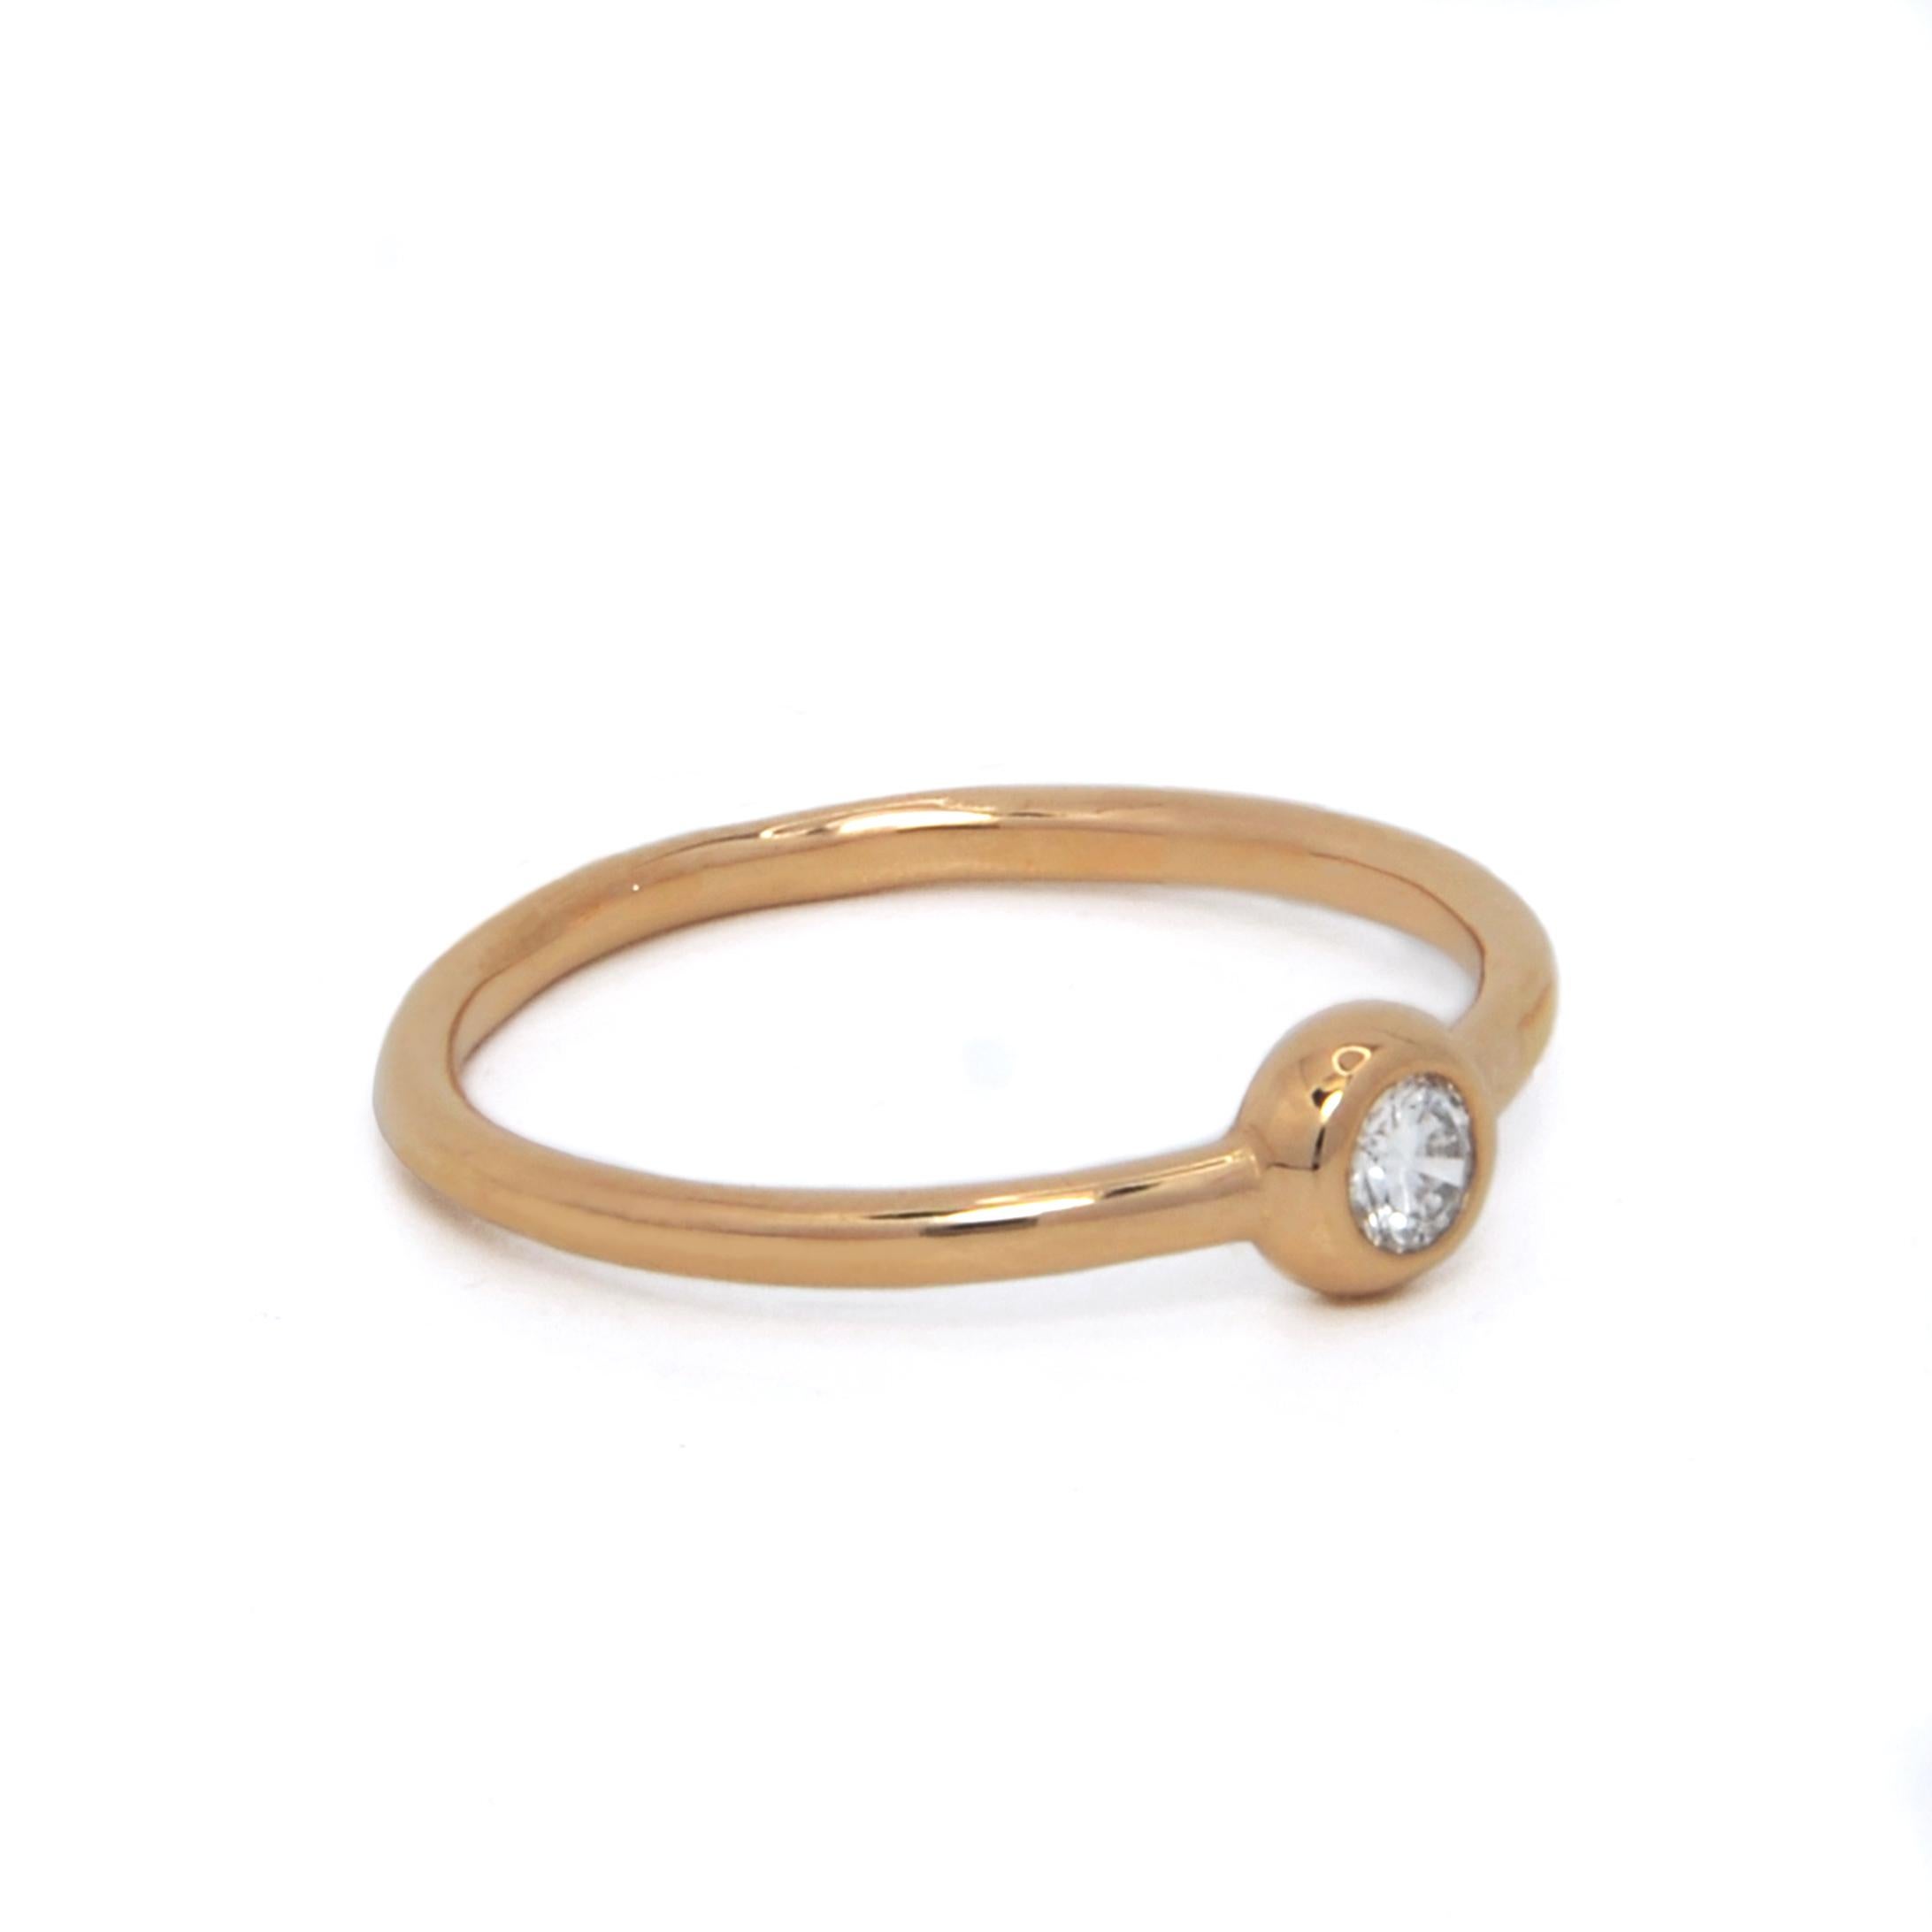 For Sale:  Ruth Nyc Ane Ring, Solitaire Diamond Ring in 14k Yellow Gold 4